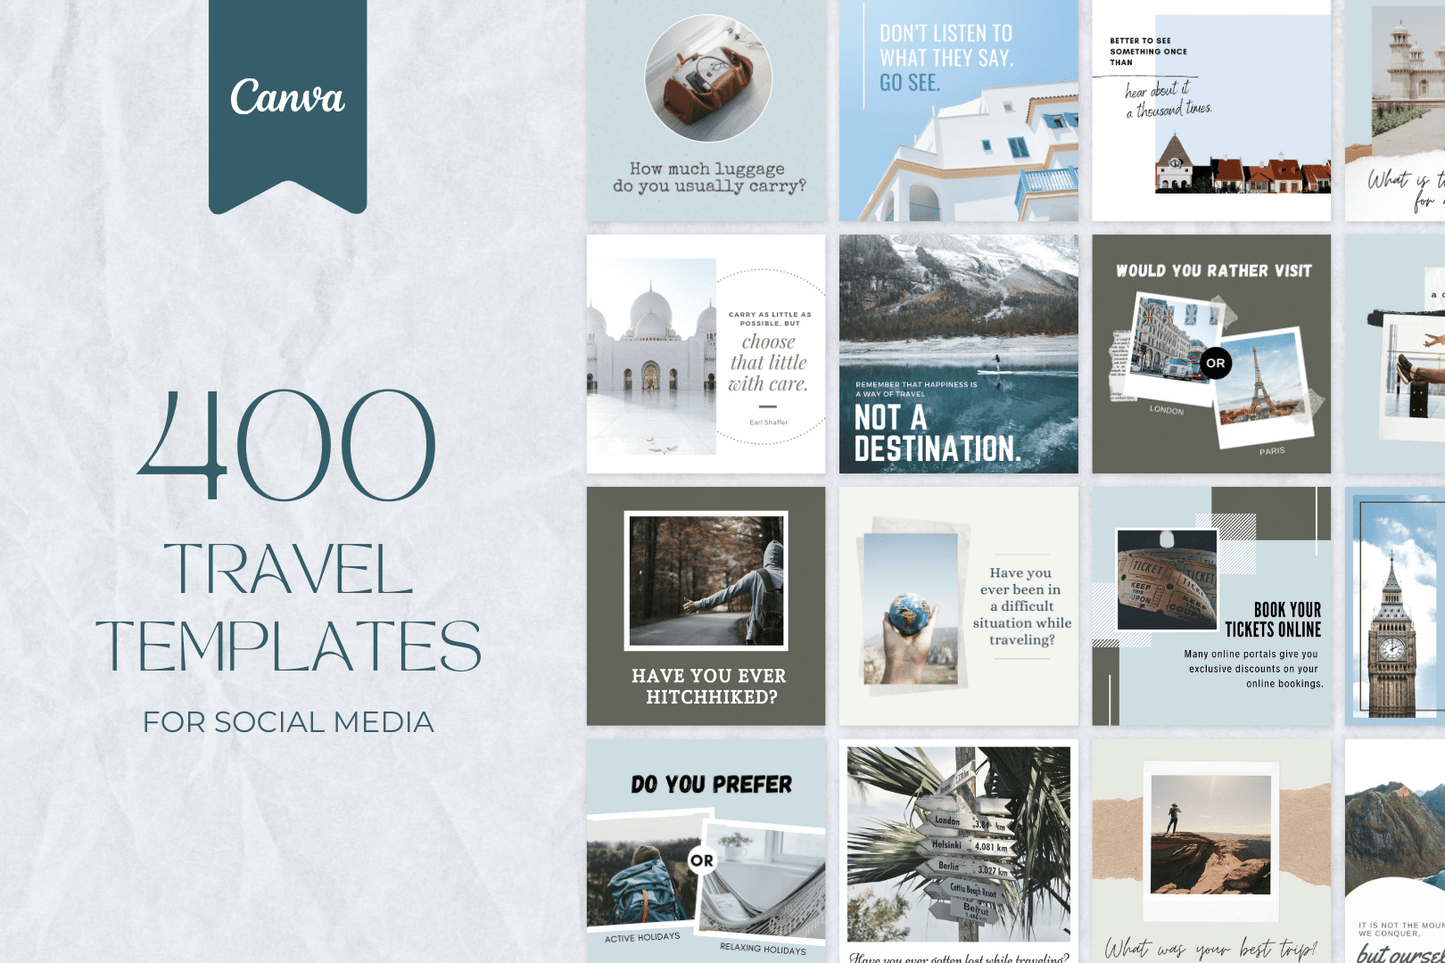 Travel Agency Bundle With 400 Travel Templates For Social Media